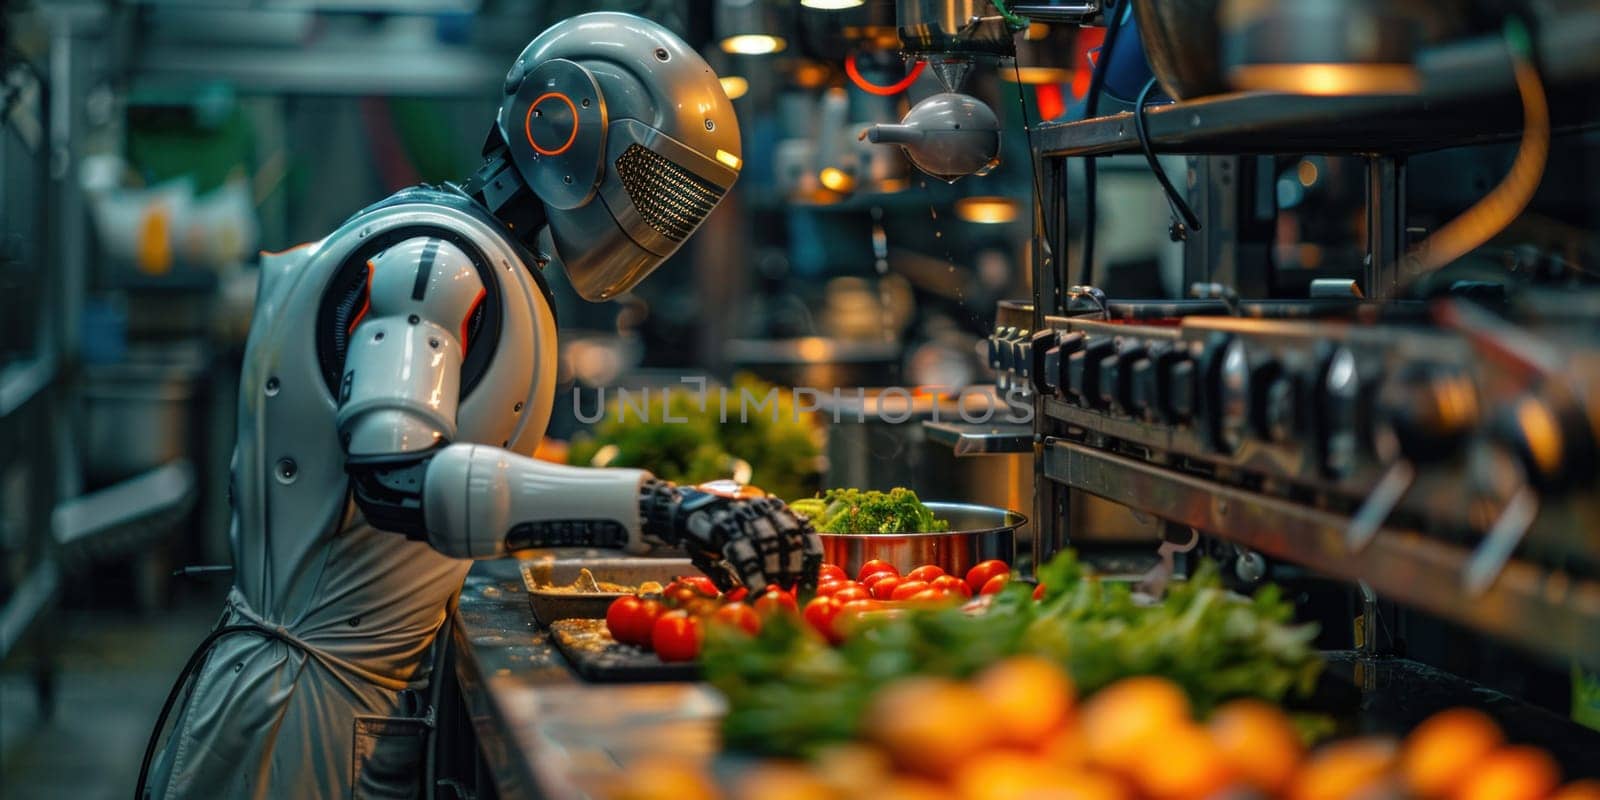 Robot Preparing Food in Kitchen by but_photo